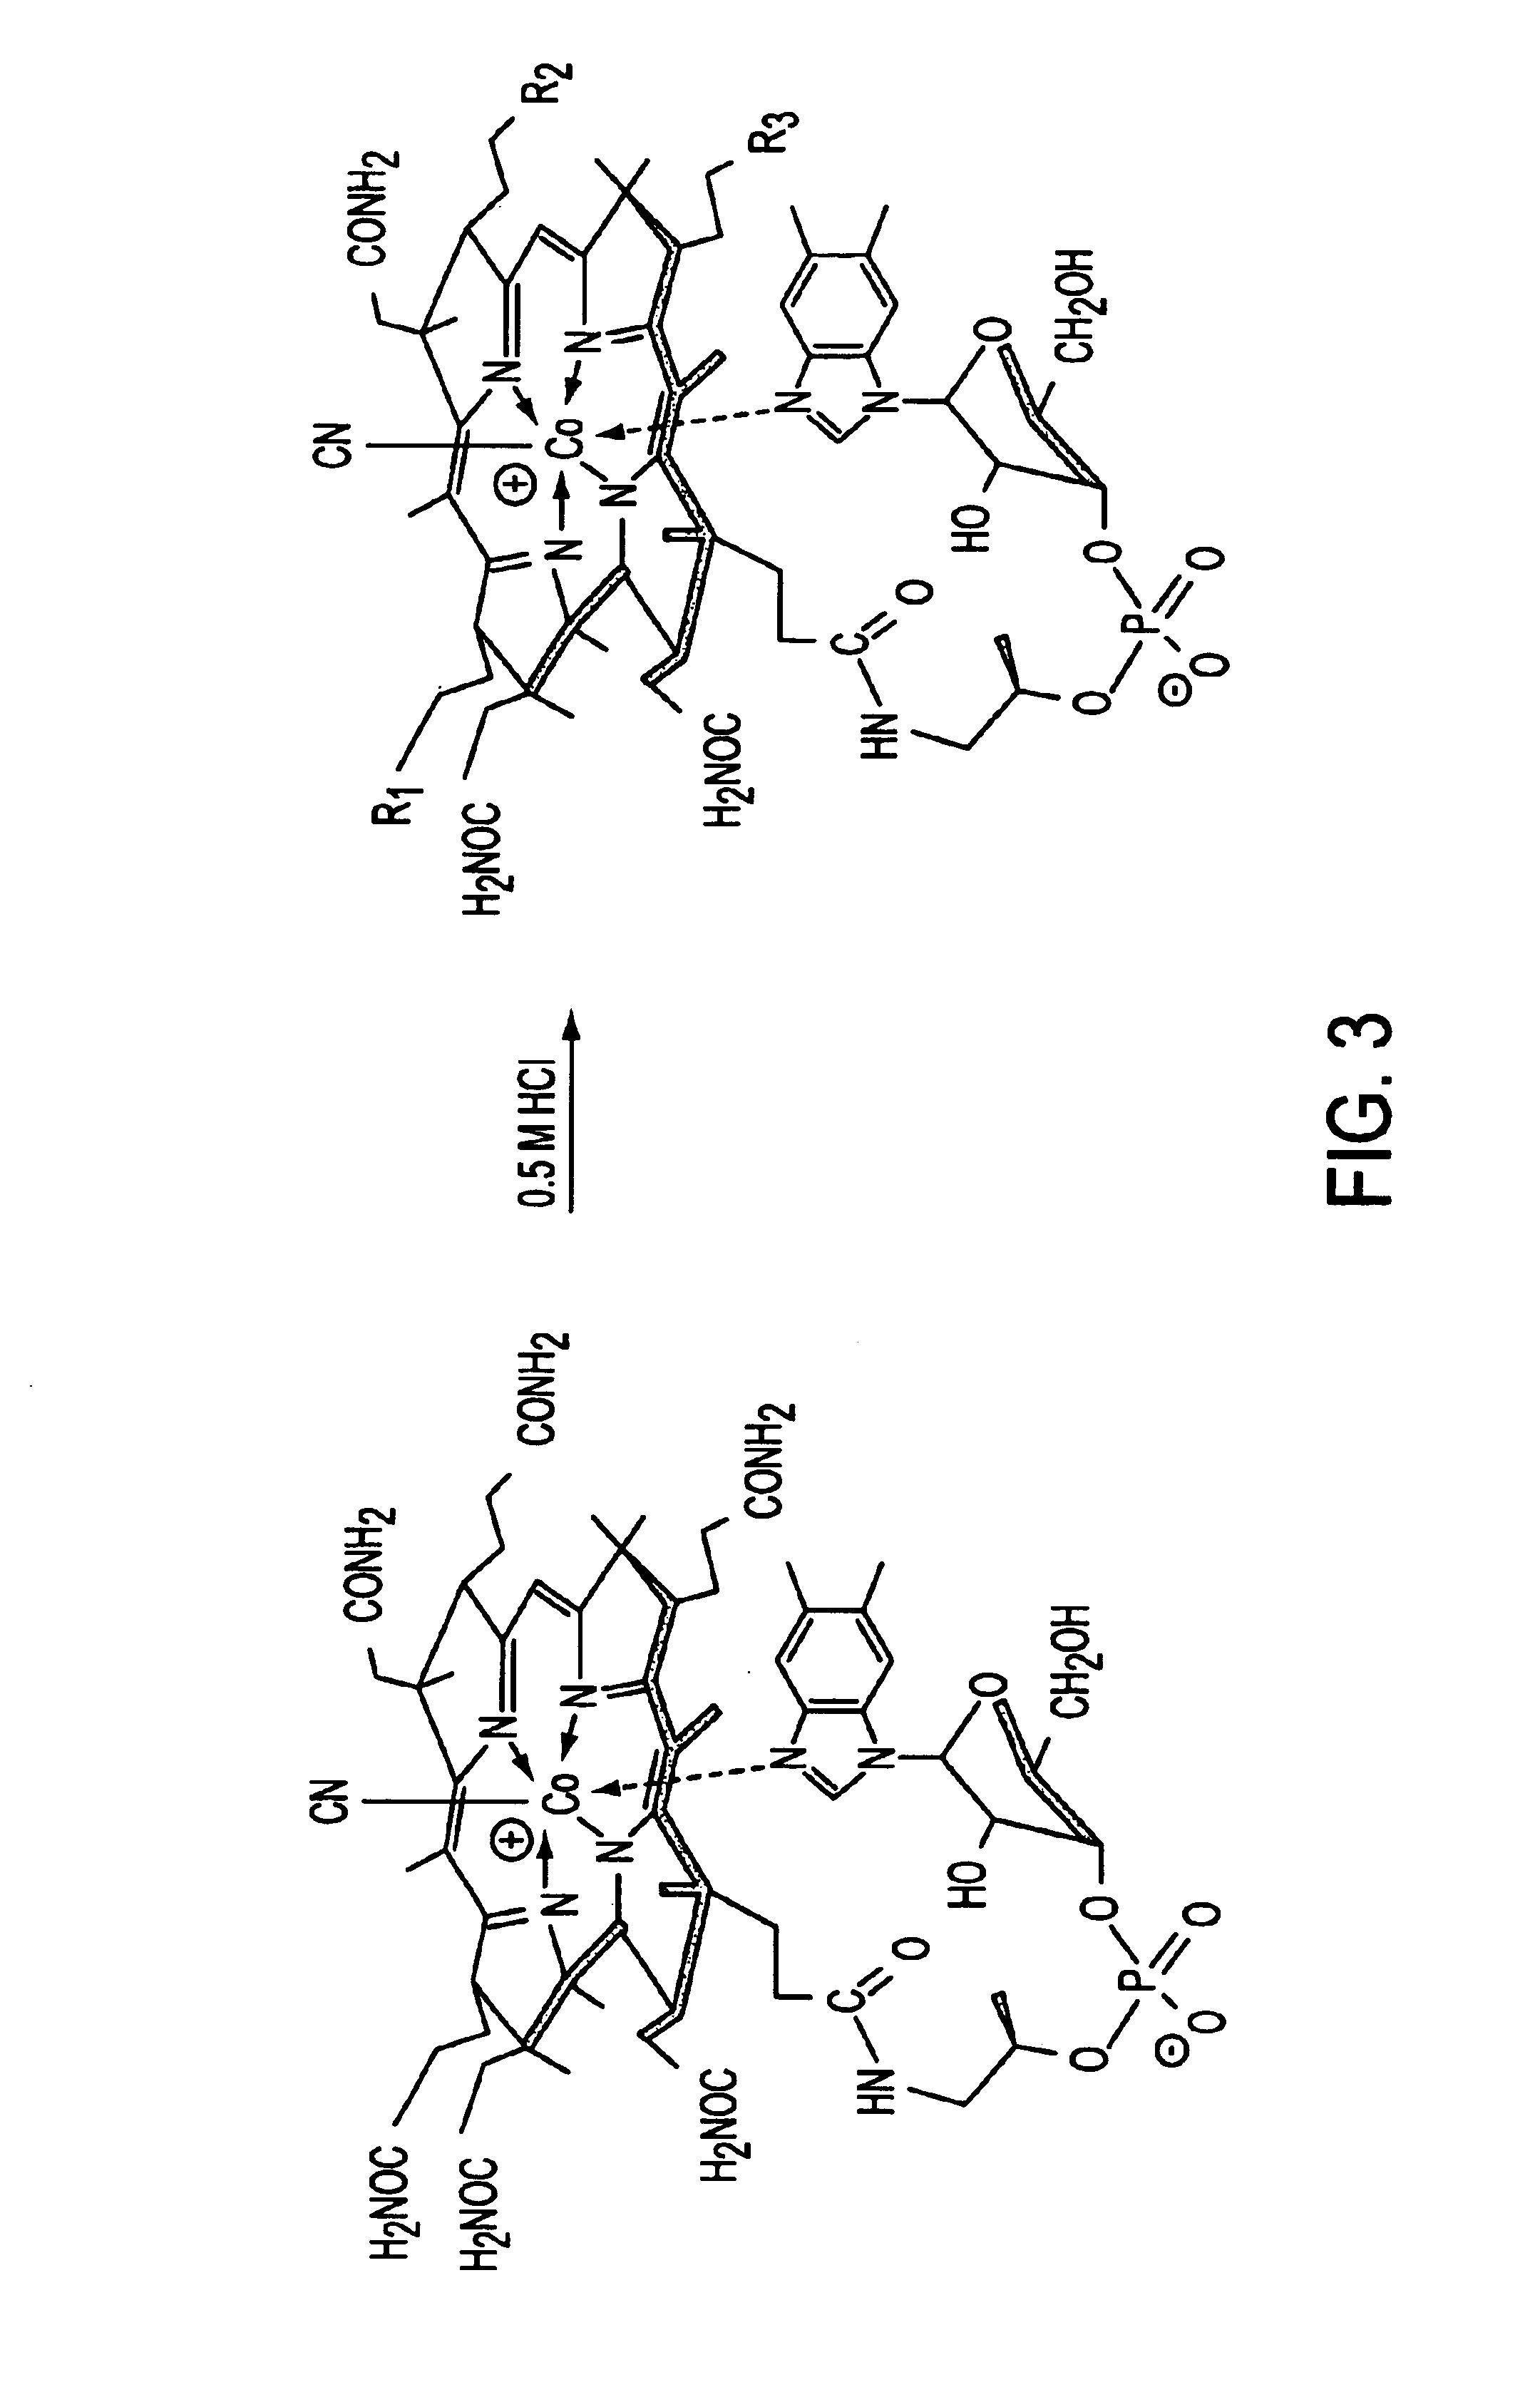 Fluorescent cobalamins and uses thereof